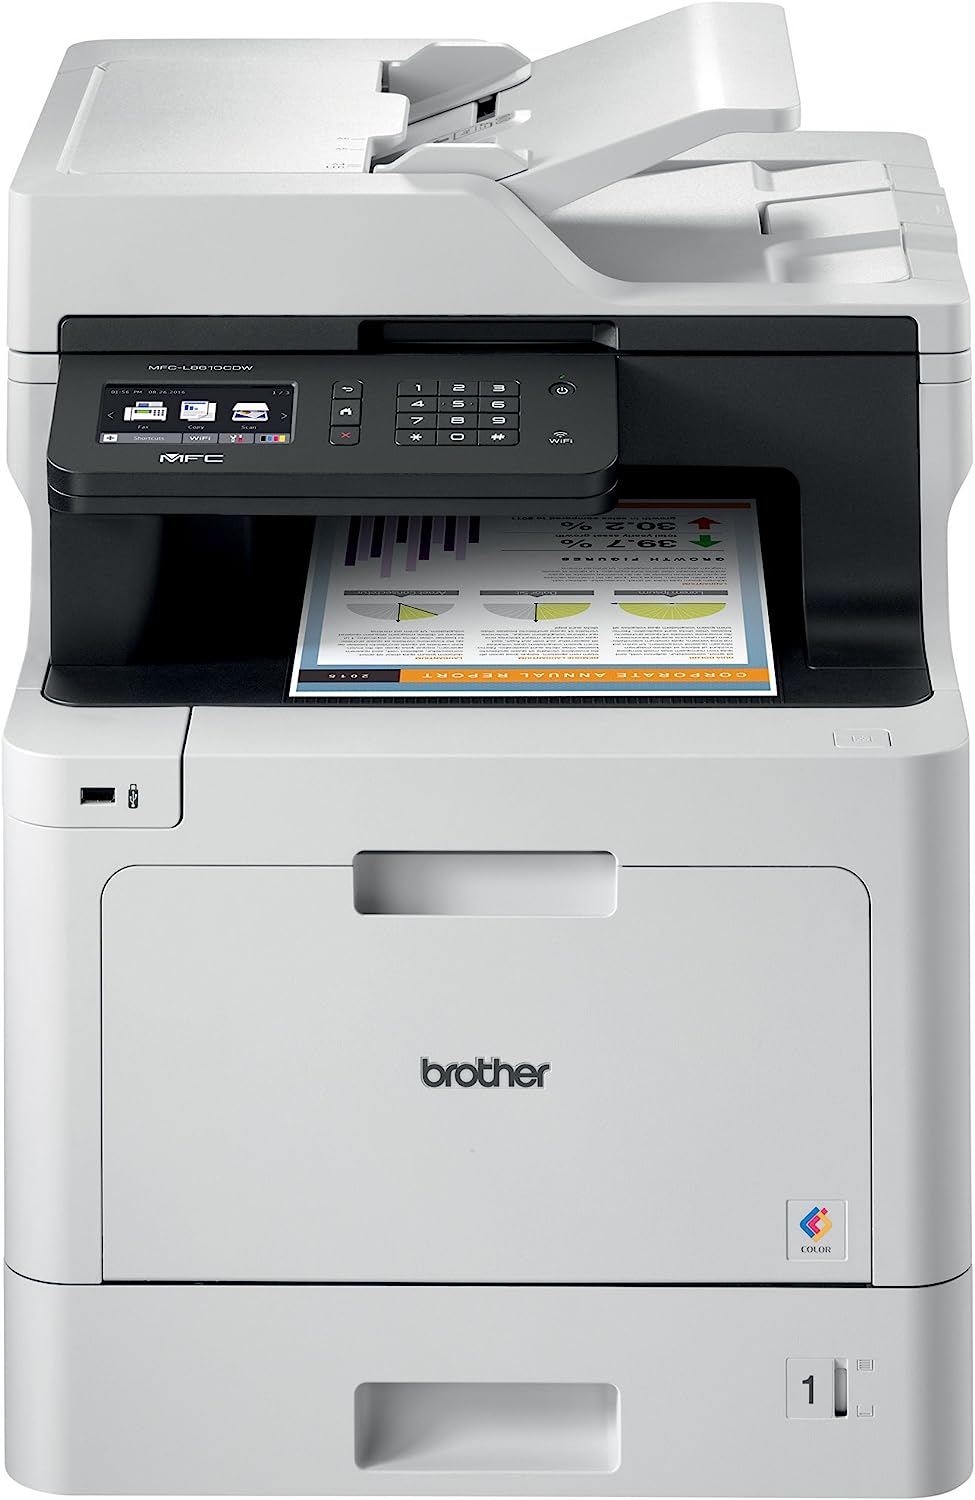 Brother Color Laser Printer, White Multifunction [...]